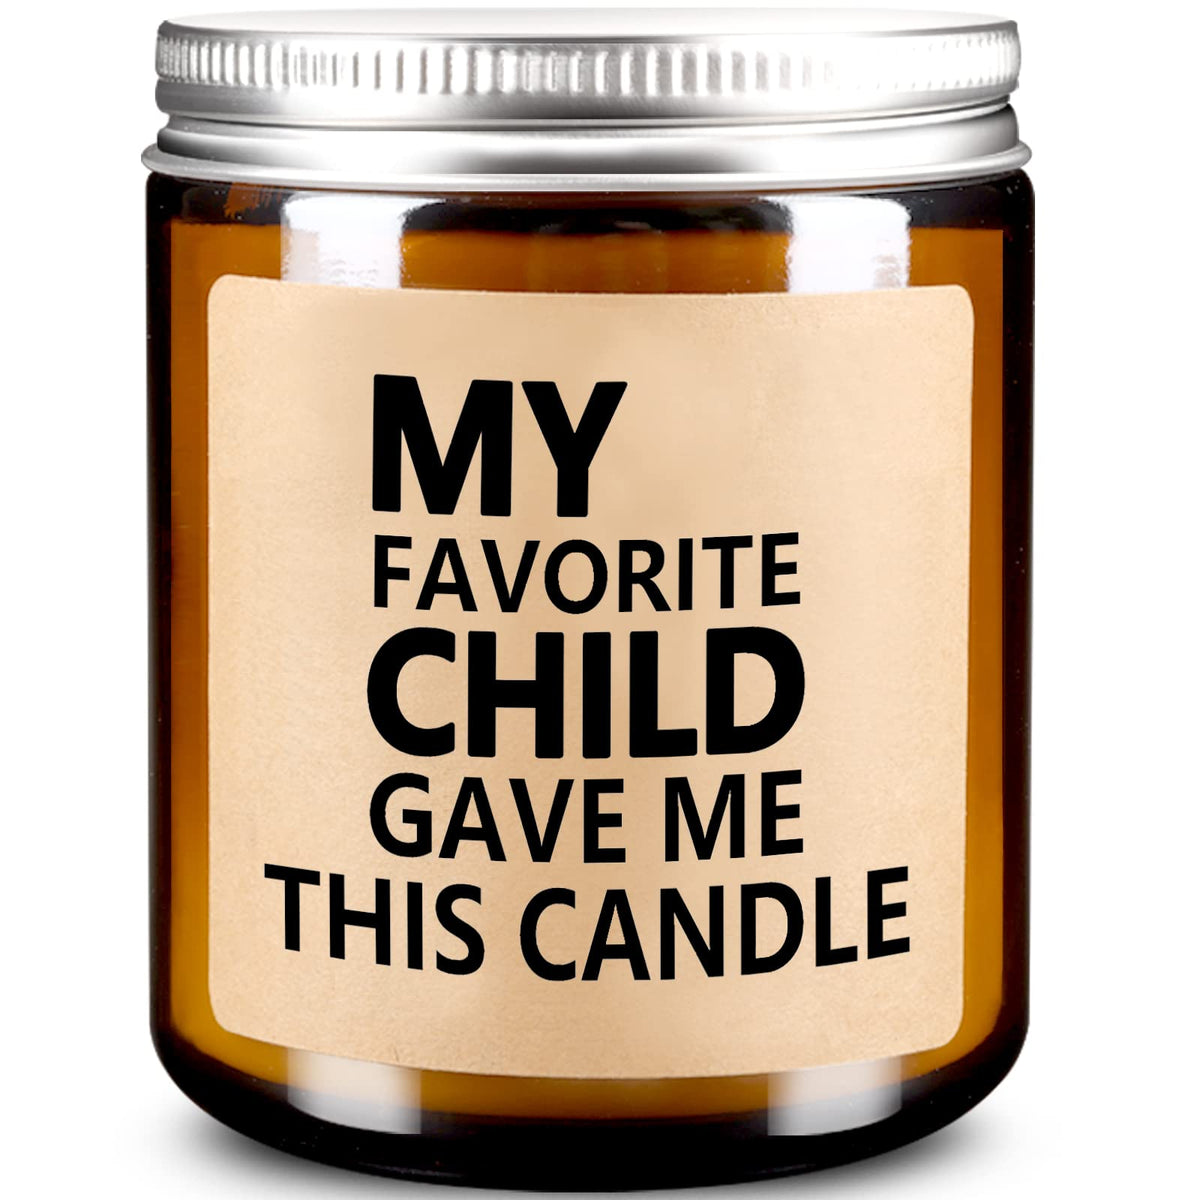 My Favorite Child Gave Me This Candle - Mom Candle with Candlesnuffer - Mothers Day Candles from Daughter - Gifts for Mom from Son on Birthday - Lavender Scented Candles for Mom